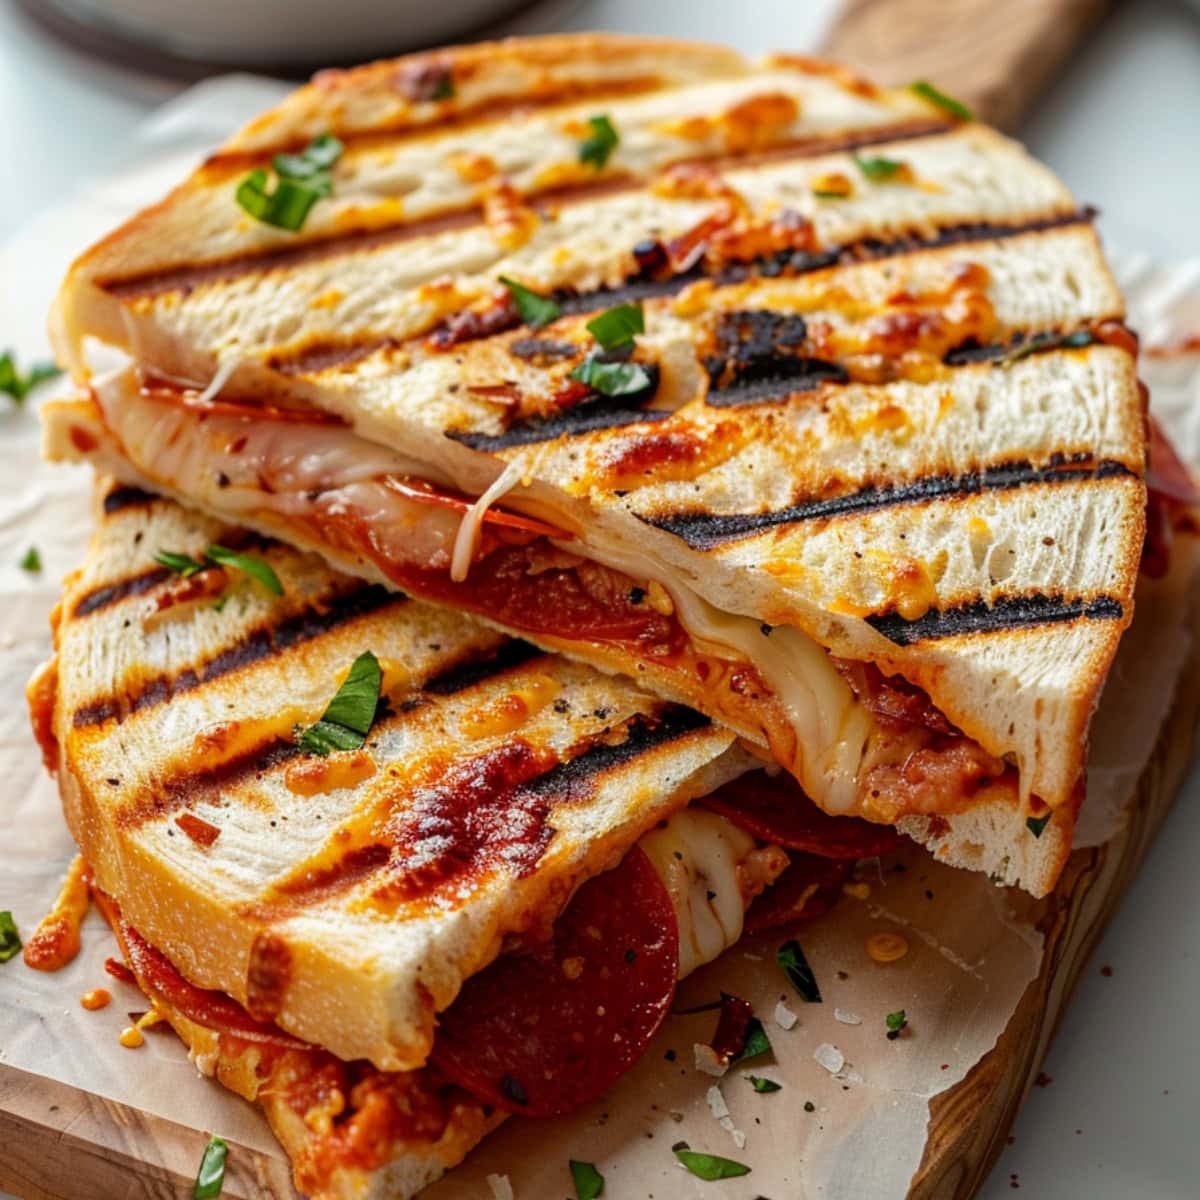 Grilled ciabatta bread with pizza sauce, melted mozzarella and spicy pepperoni